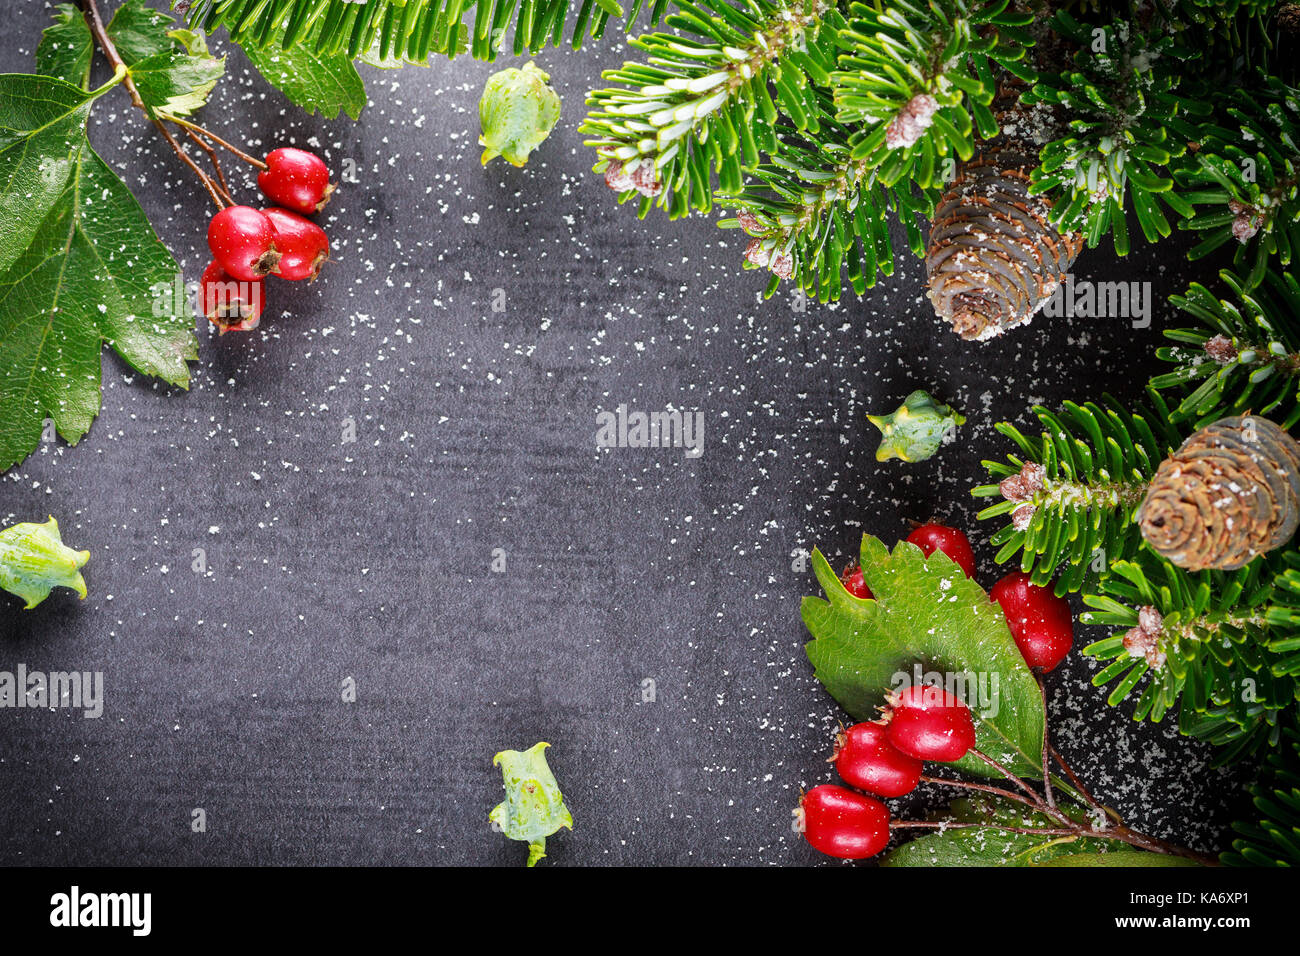 Decorative christmas background with green twigs and red berries. Stock Photo